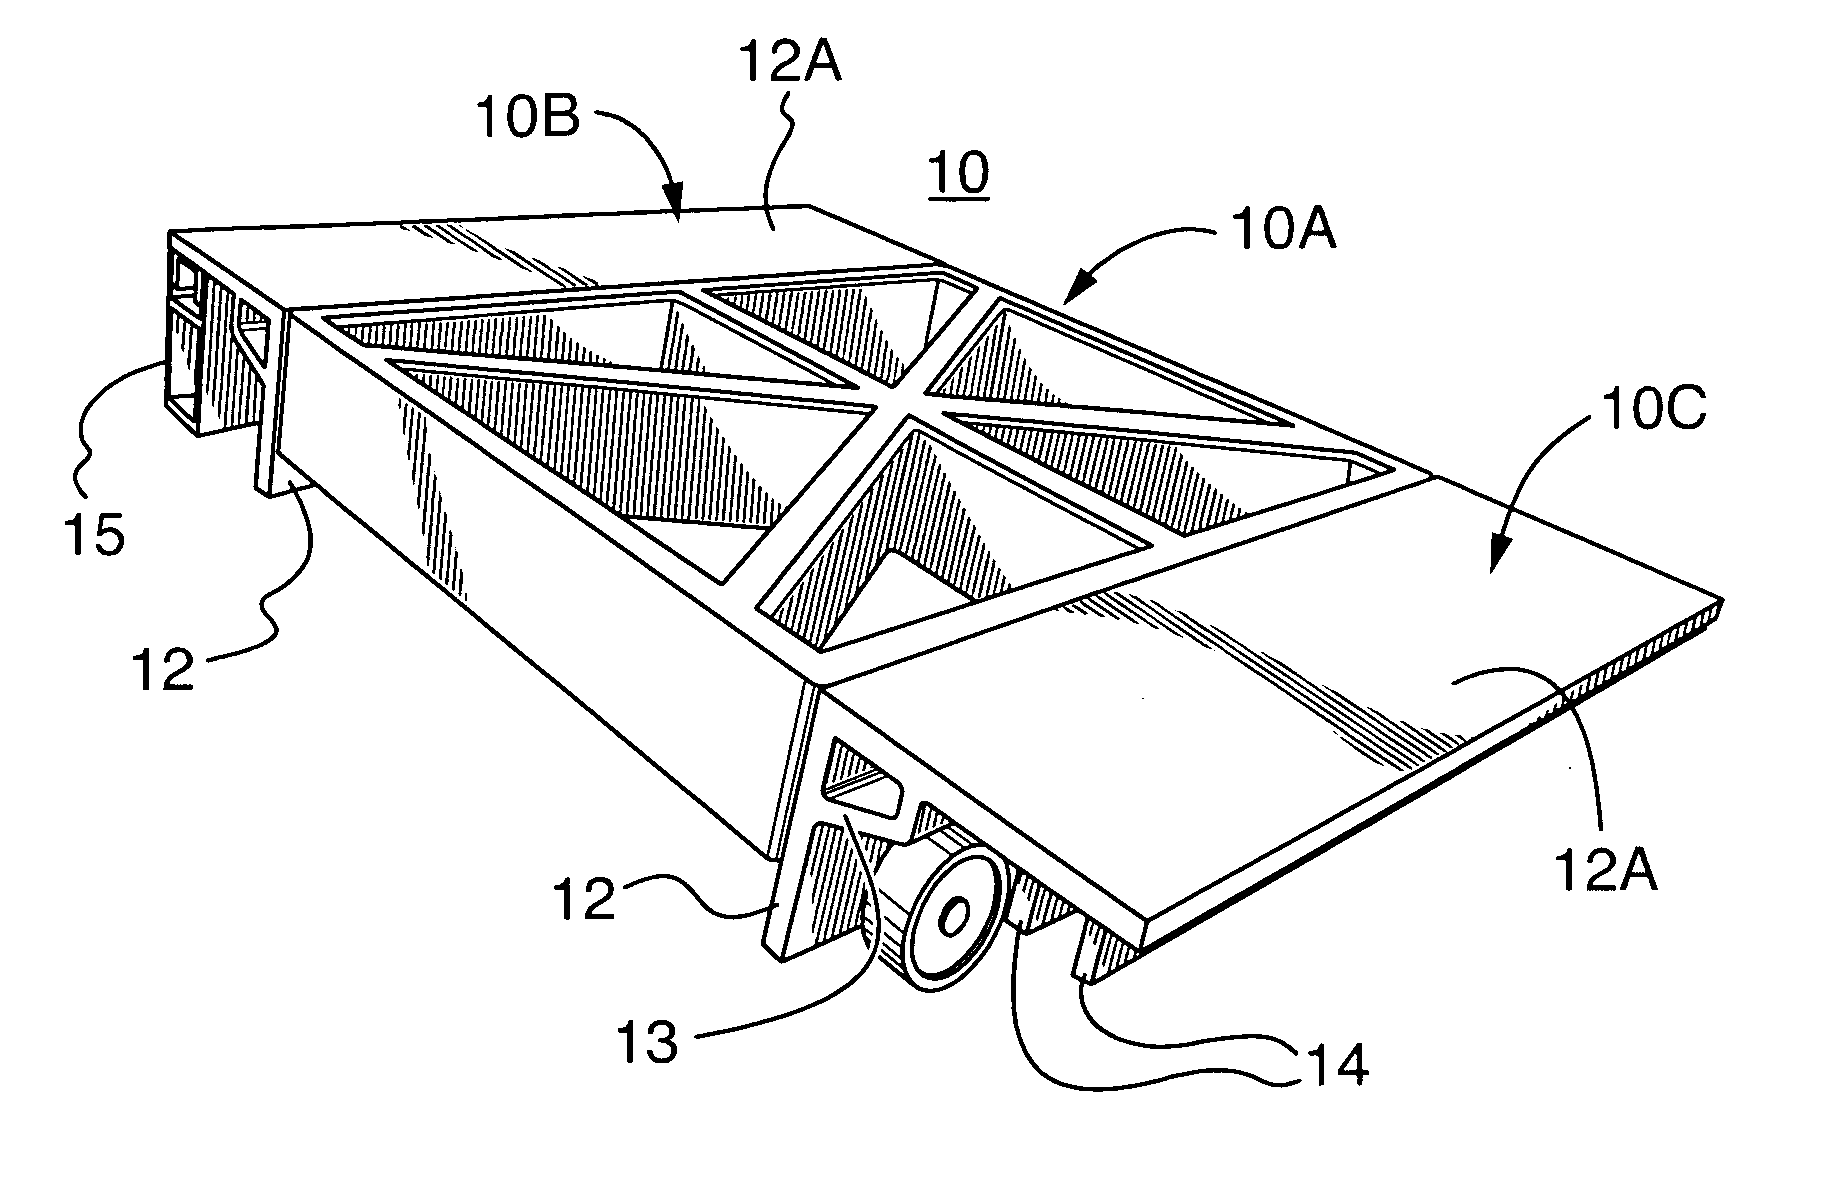 Rail carriage and rail carriage system